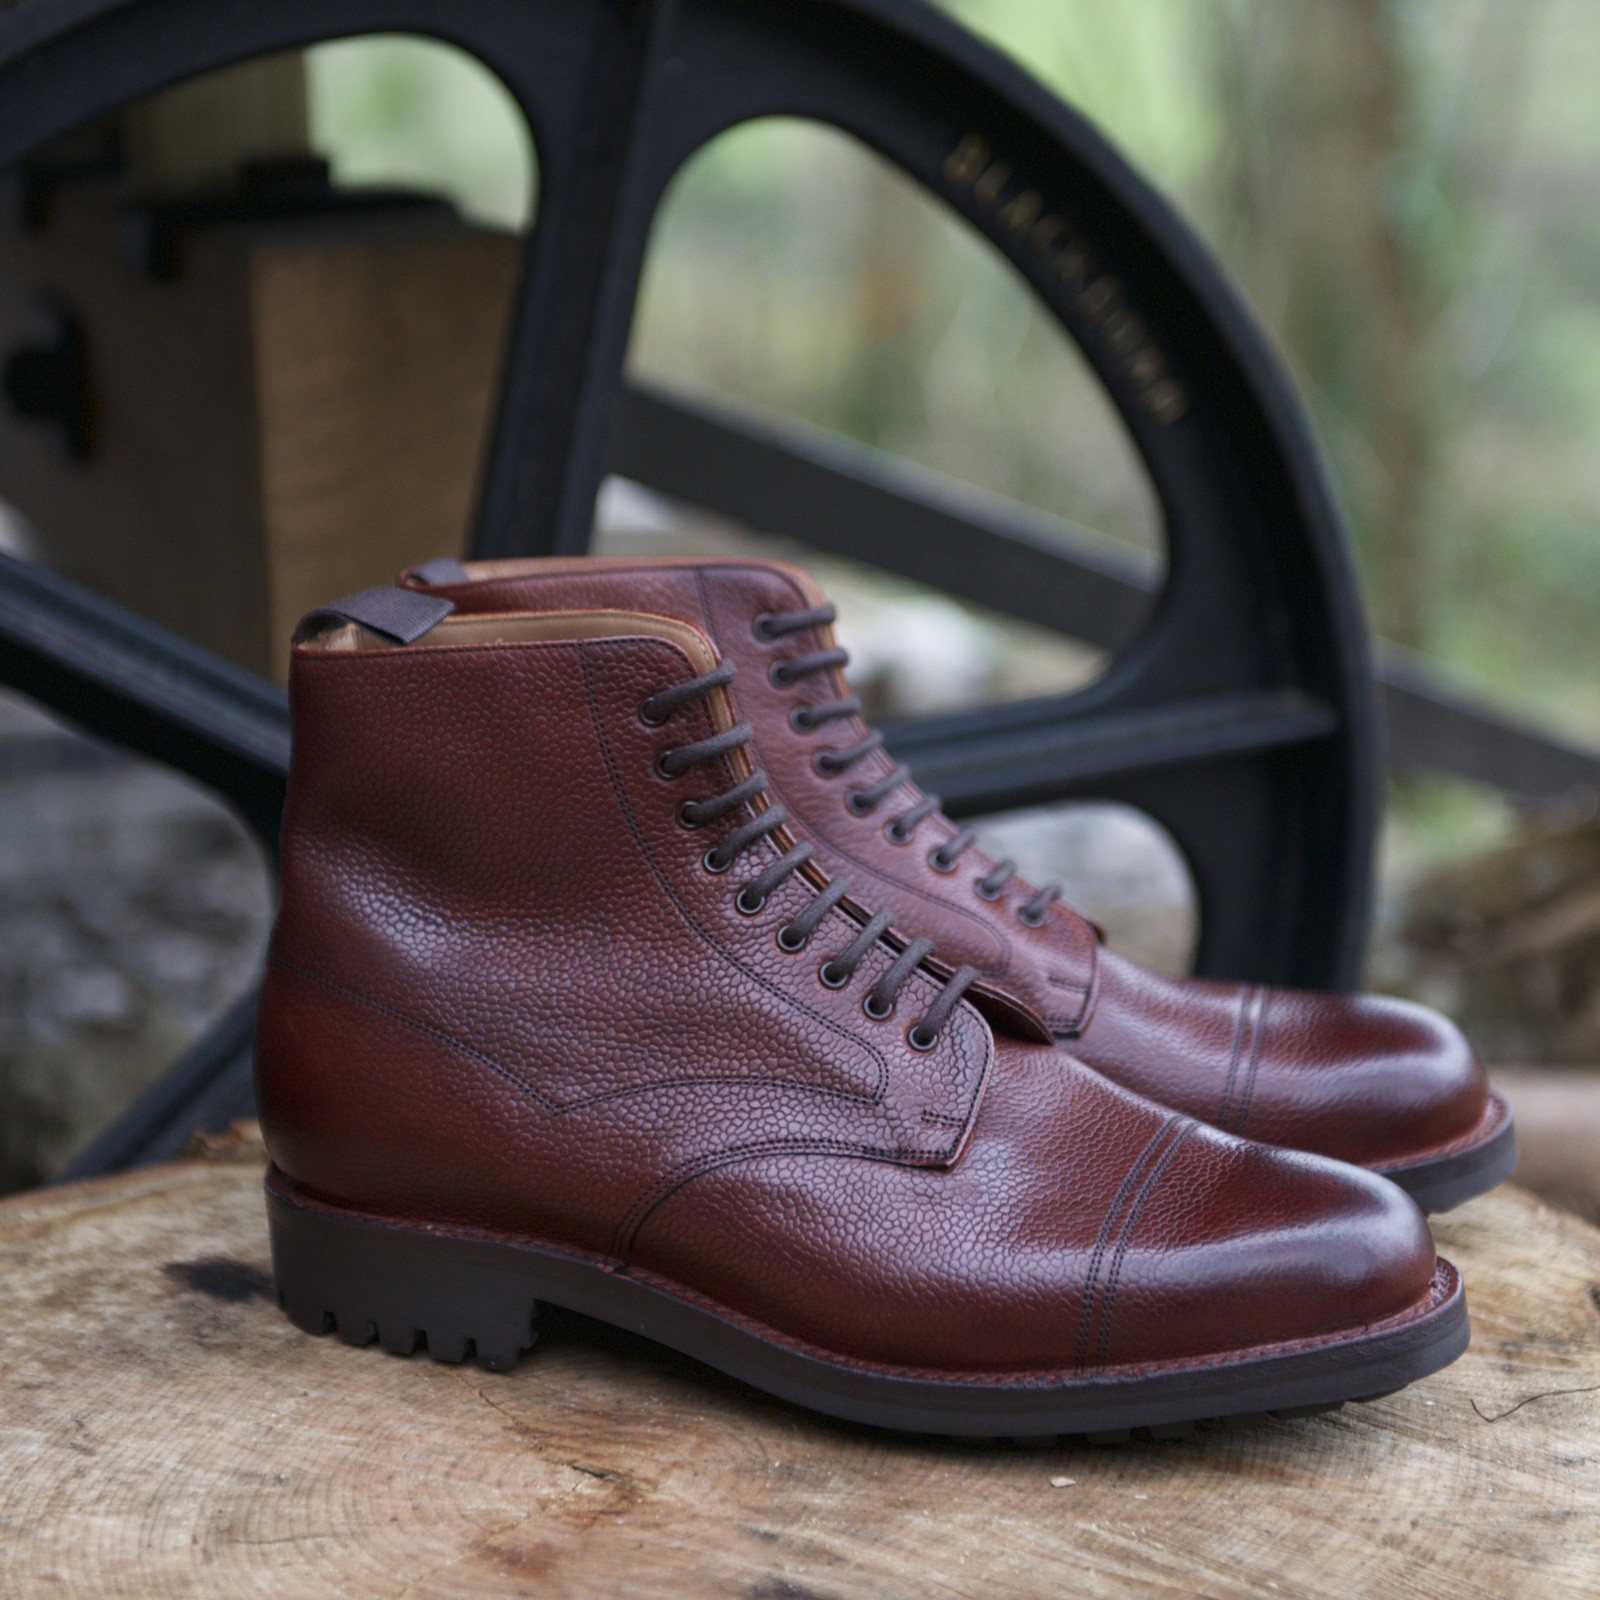 Herring shoes | Herring Premier | Windermere rubber-soled boots in ...